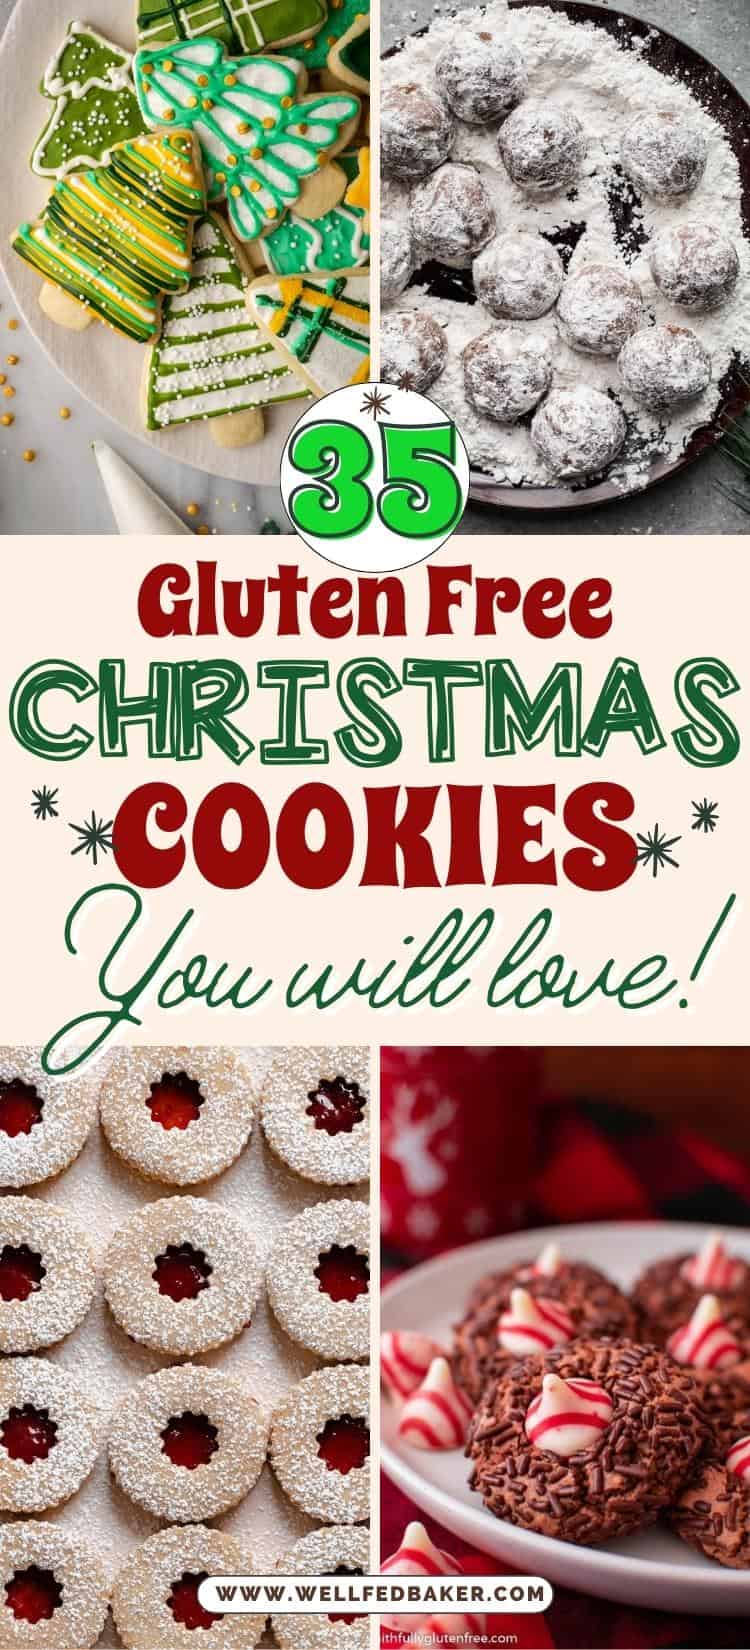 Pin for 35 best gluten free Christmas cookies you will love!